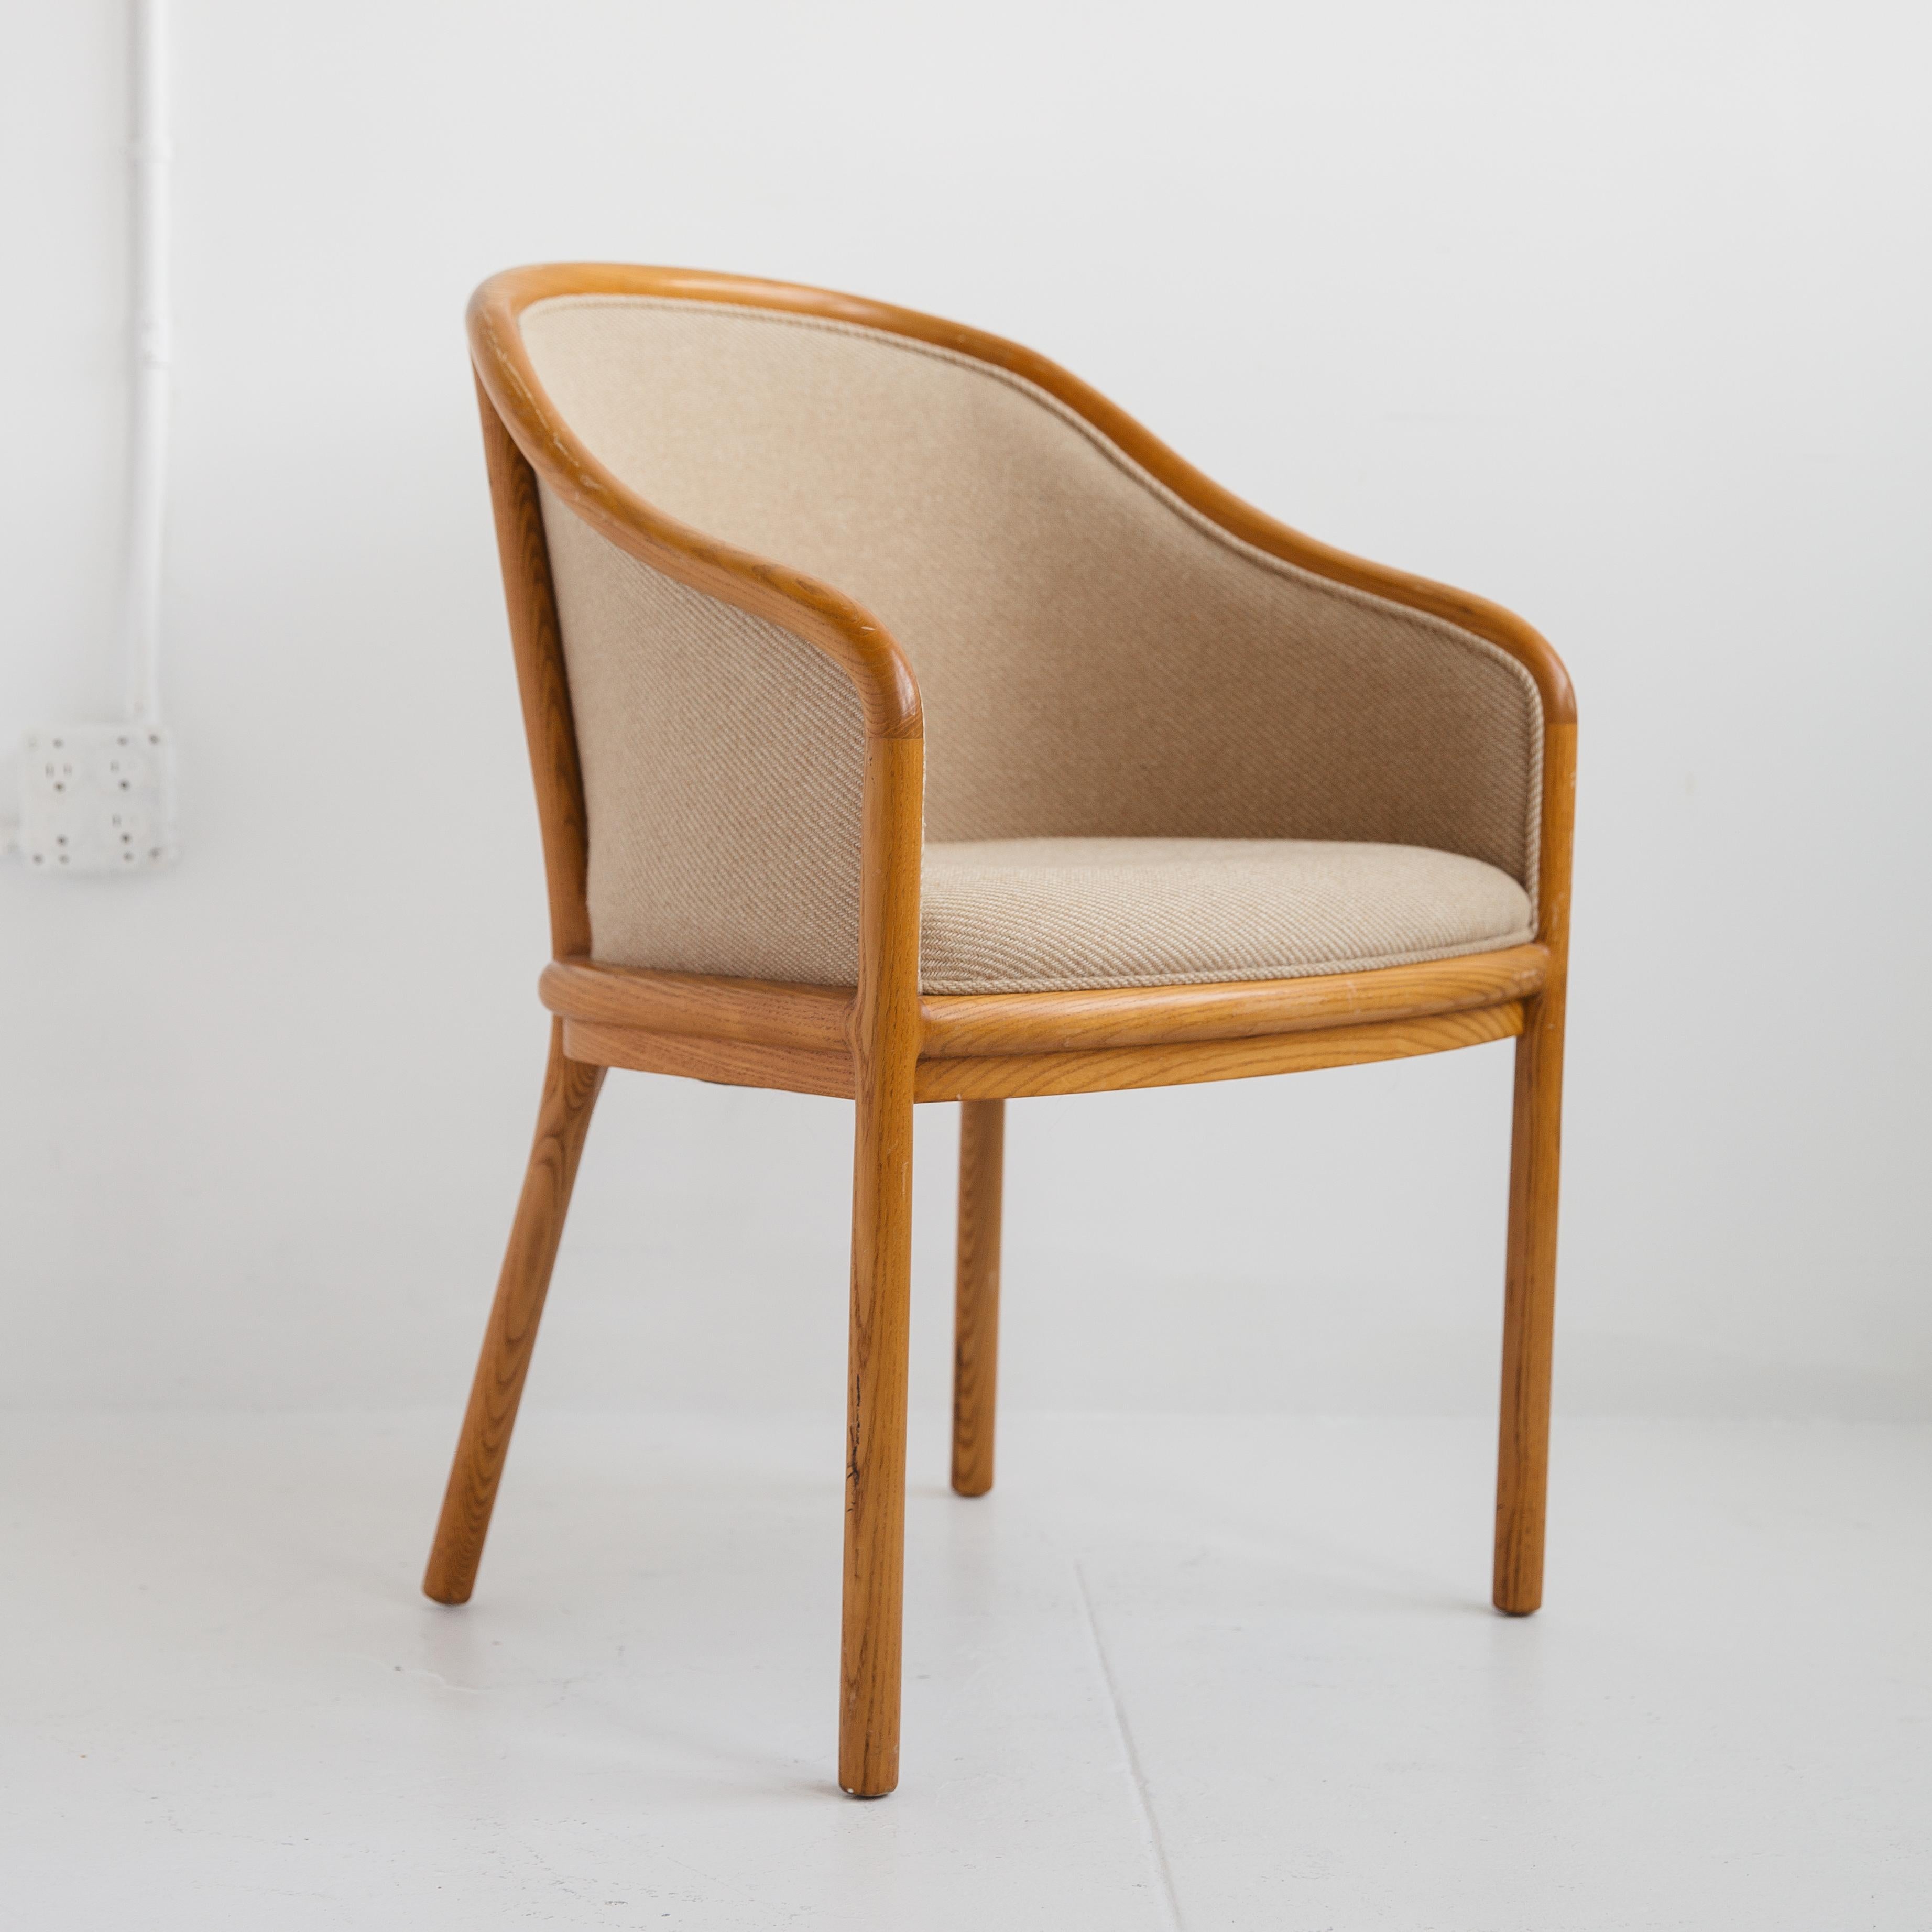 An elegant set of six upholstered dining chairs by Ward Bennett featuring bentwood oak frames and fully upholstered seats and backs in a textured taupe fabric. This is American Mid-Century Modern design at its best. The bend of the arm references